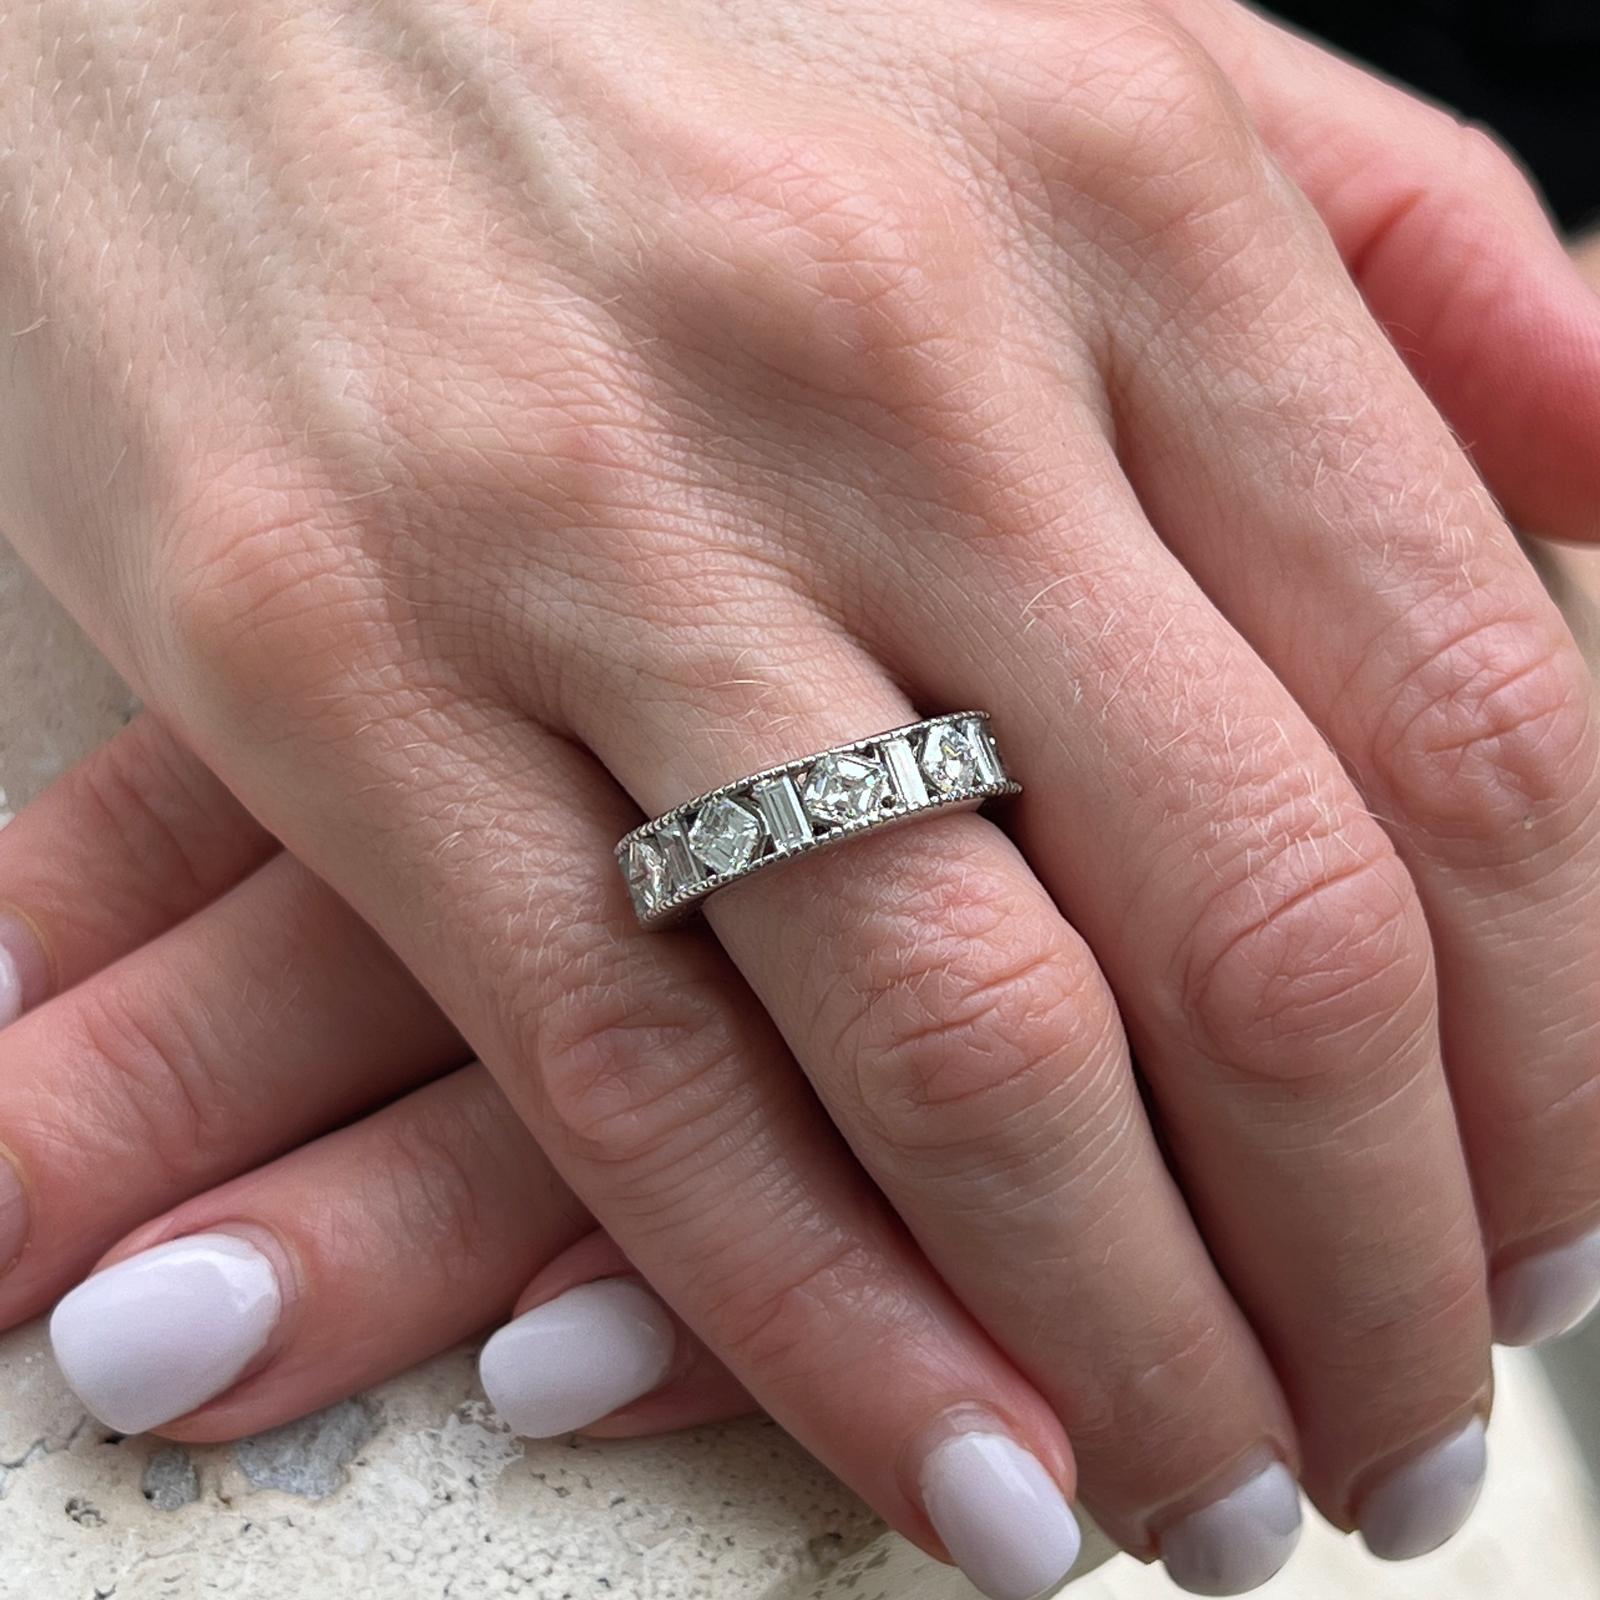 Fabulous diamond band handcrafted with milgrain edging in 18 karat white gold. The band features 6 square emerald cut diamonds weighing approximately 2.40 CTW and 7 baguettes weighing approximately 1.00 CTW (3.40 CTW). The diamonds are graded G-H